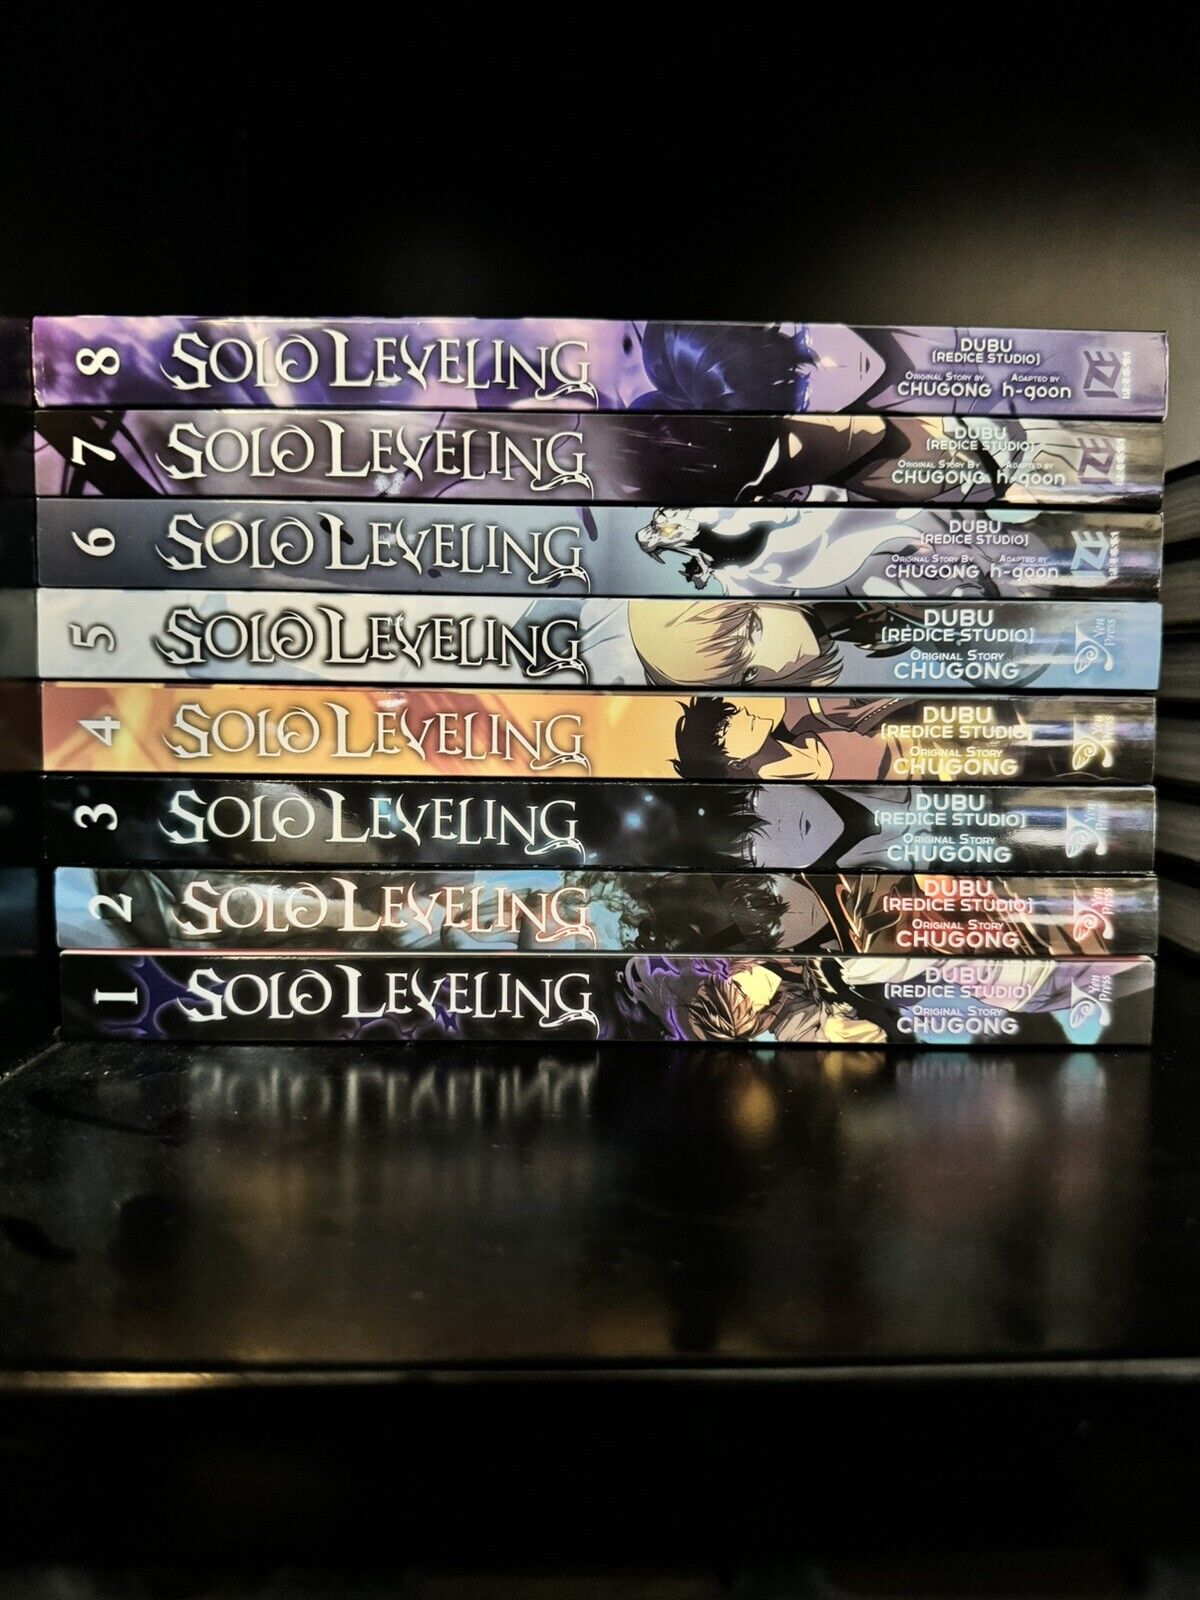 Solo Leveling Manhwa Vol. 1-8 Complete Set Comic Full Color English Chugong